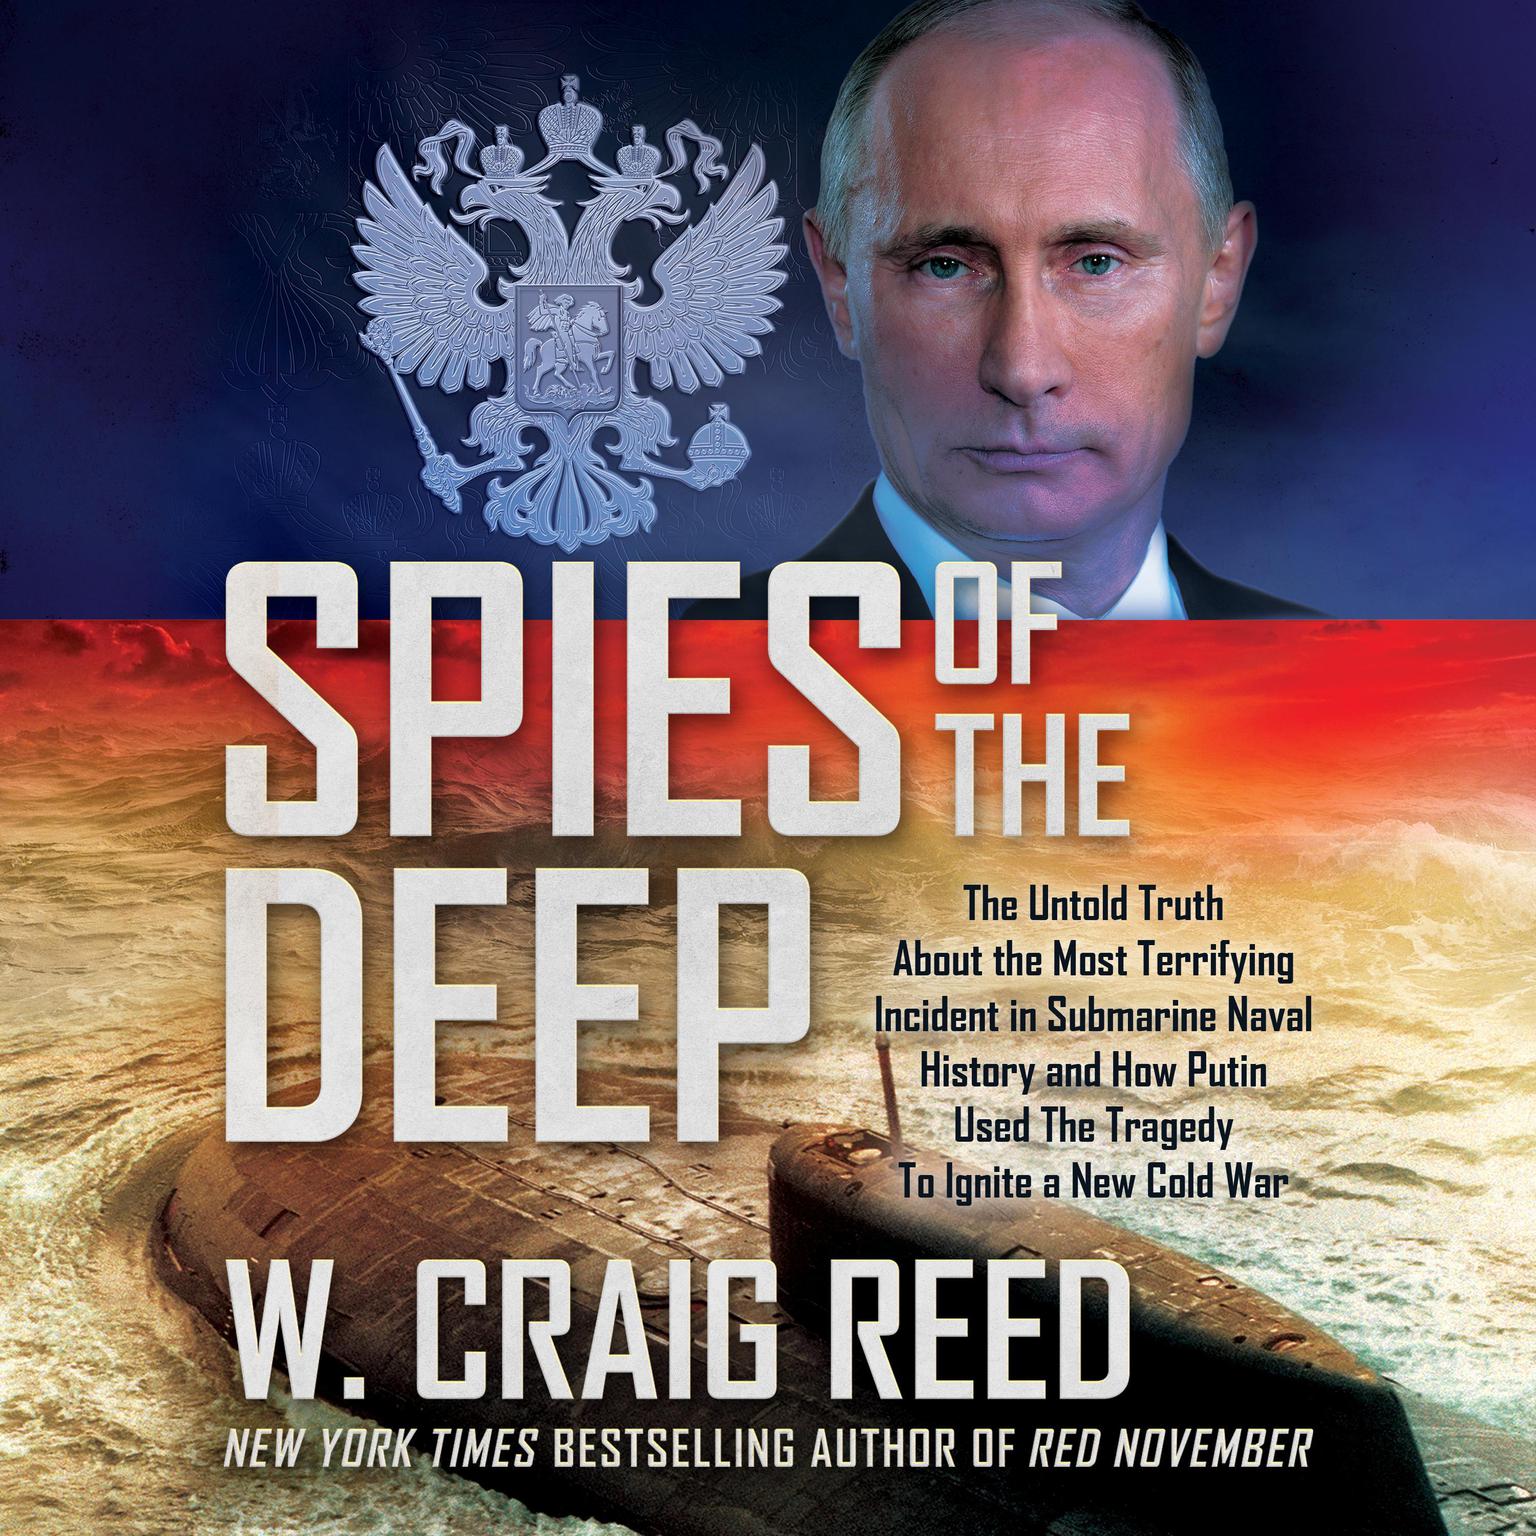 Spies of the Deep: The Untold Truth About the Most Terrifying Incident in Submarine Naval History and How Putin Used The Tragedy To Ignite a New Cold War Audiobook, by W. Craig Reed